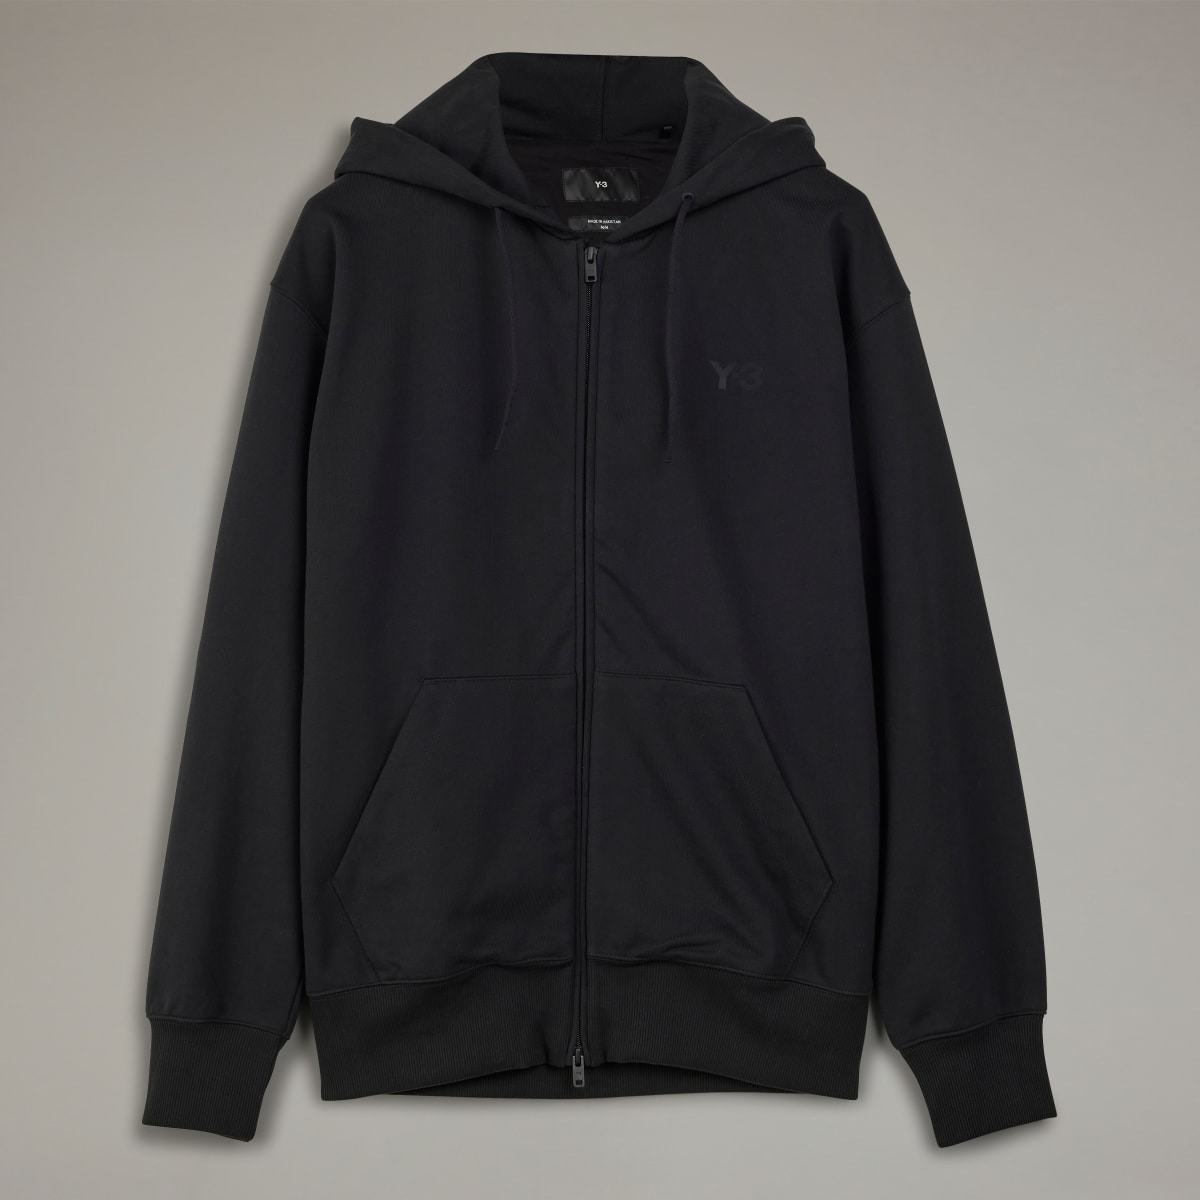 Adidas Y-3 French Terry Zip Hoodie. 5